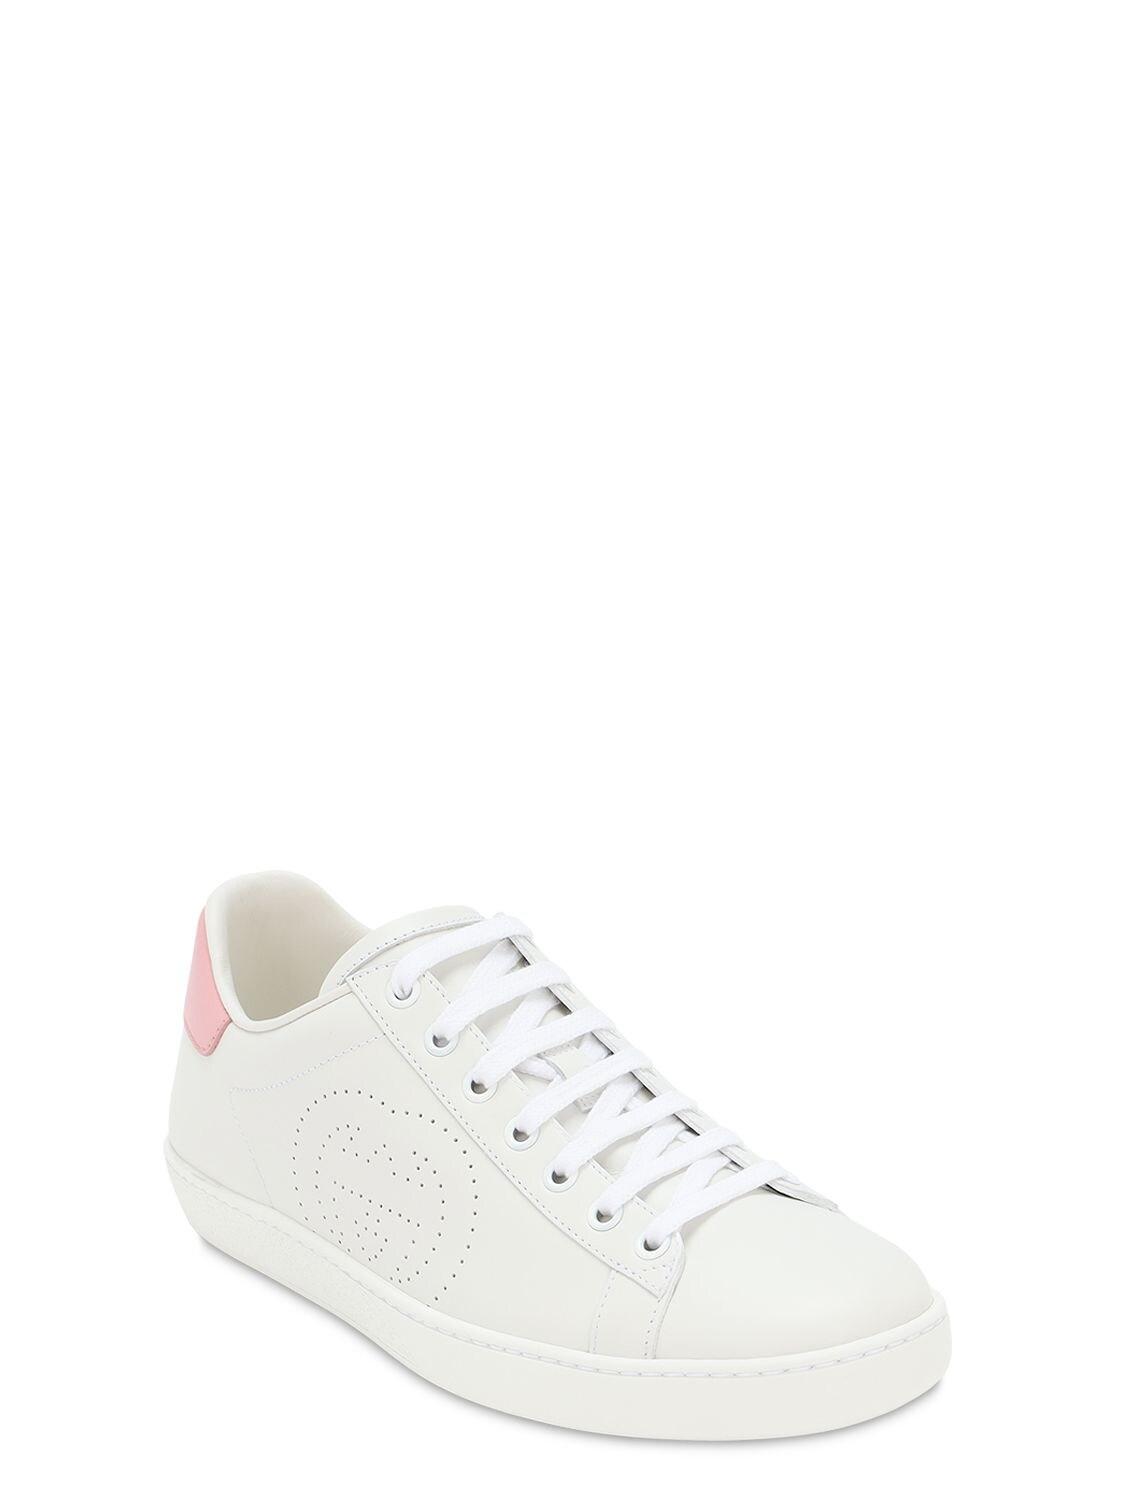 Gucci + Net Sustain Ace Leather Sneakers in White Pink (White) - Save ...